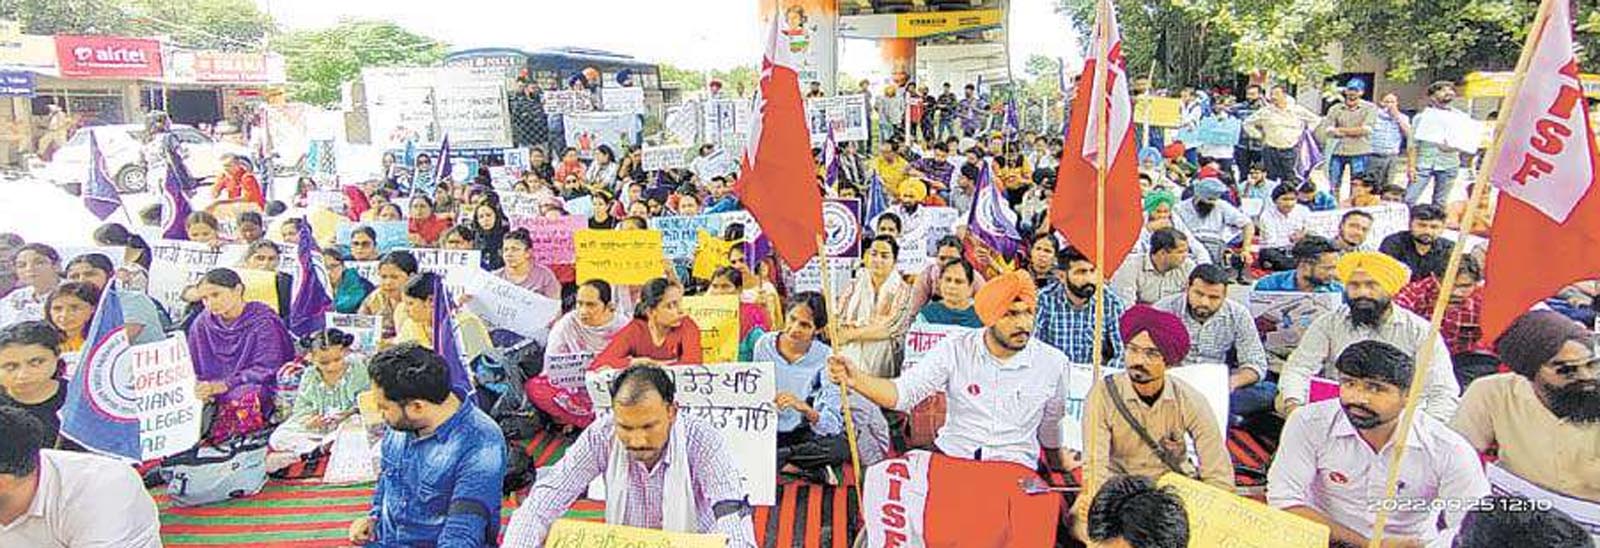 1158 Assistant Professors and Librarians Front Punjab organized a protest along with various organizations